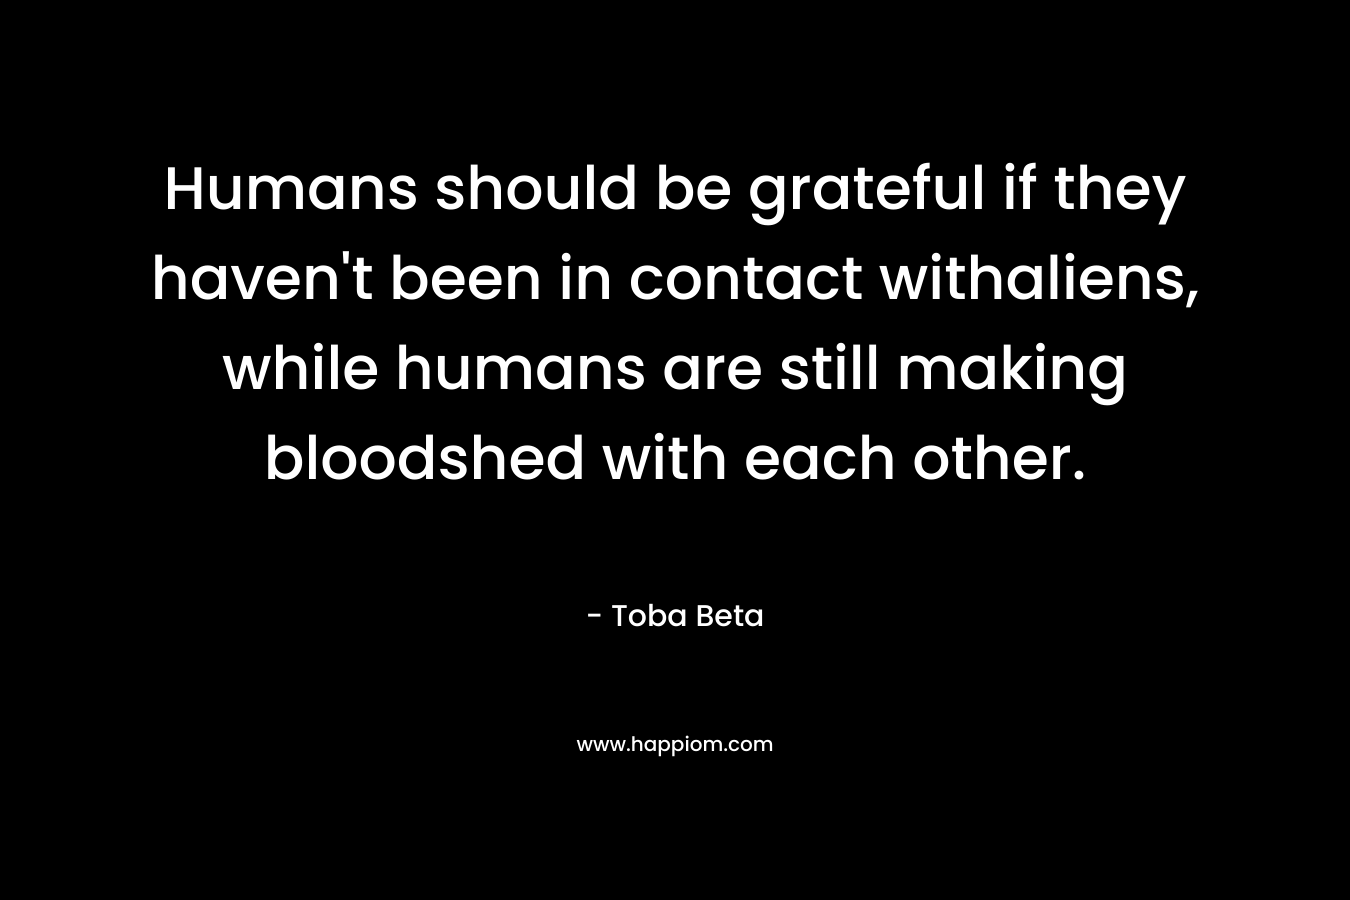 Humans should be grateful if they haven’t been in contact withaliens, while humans are still making bloodshed with each other. – Toba Beta